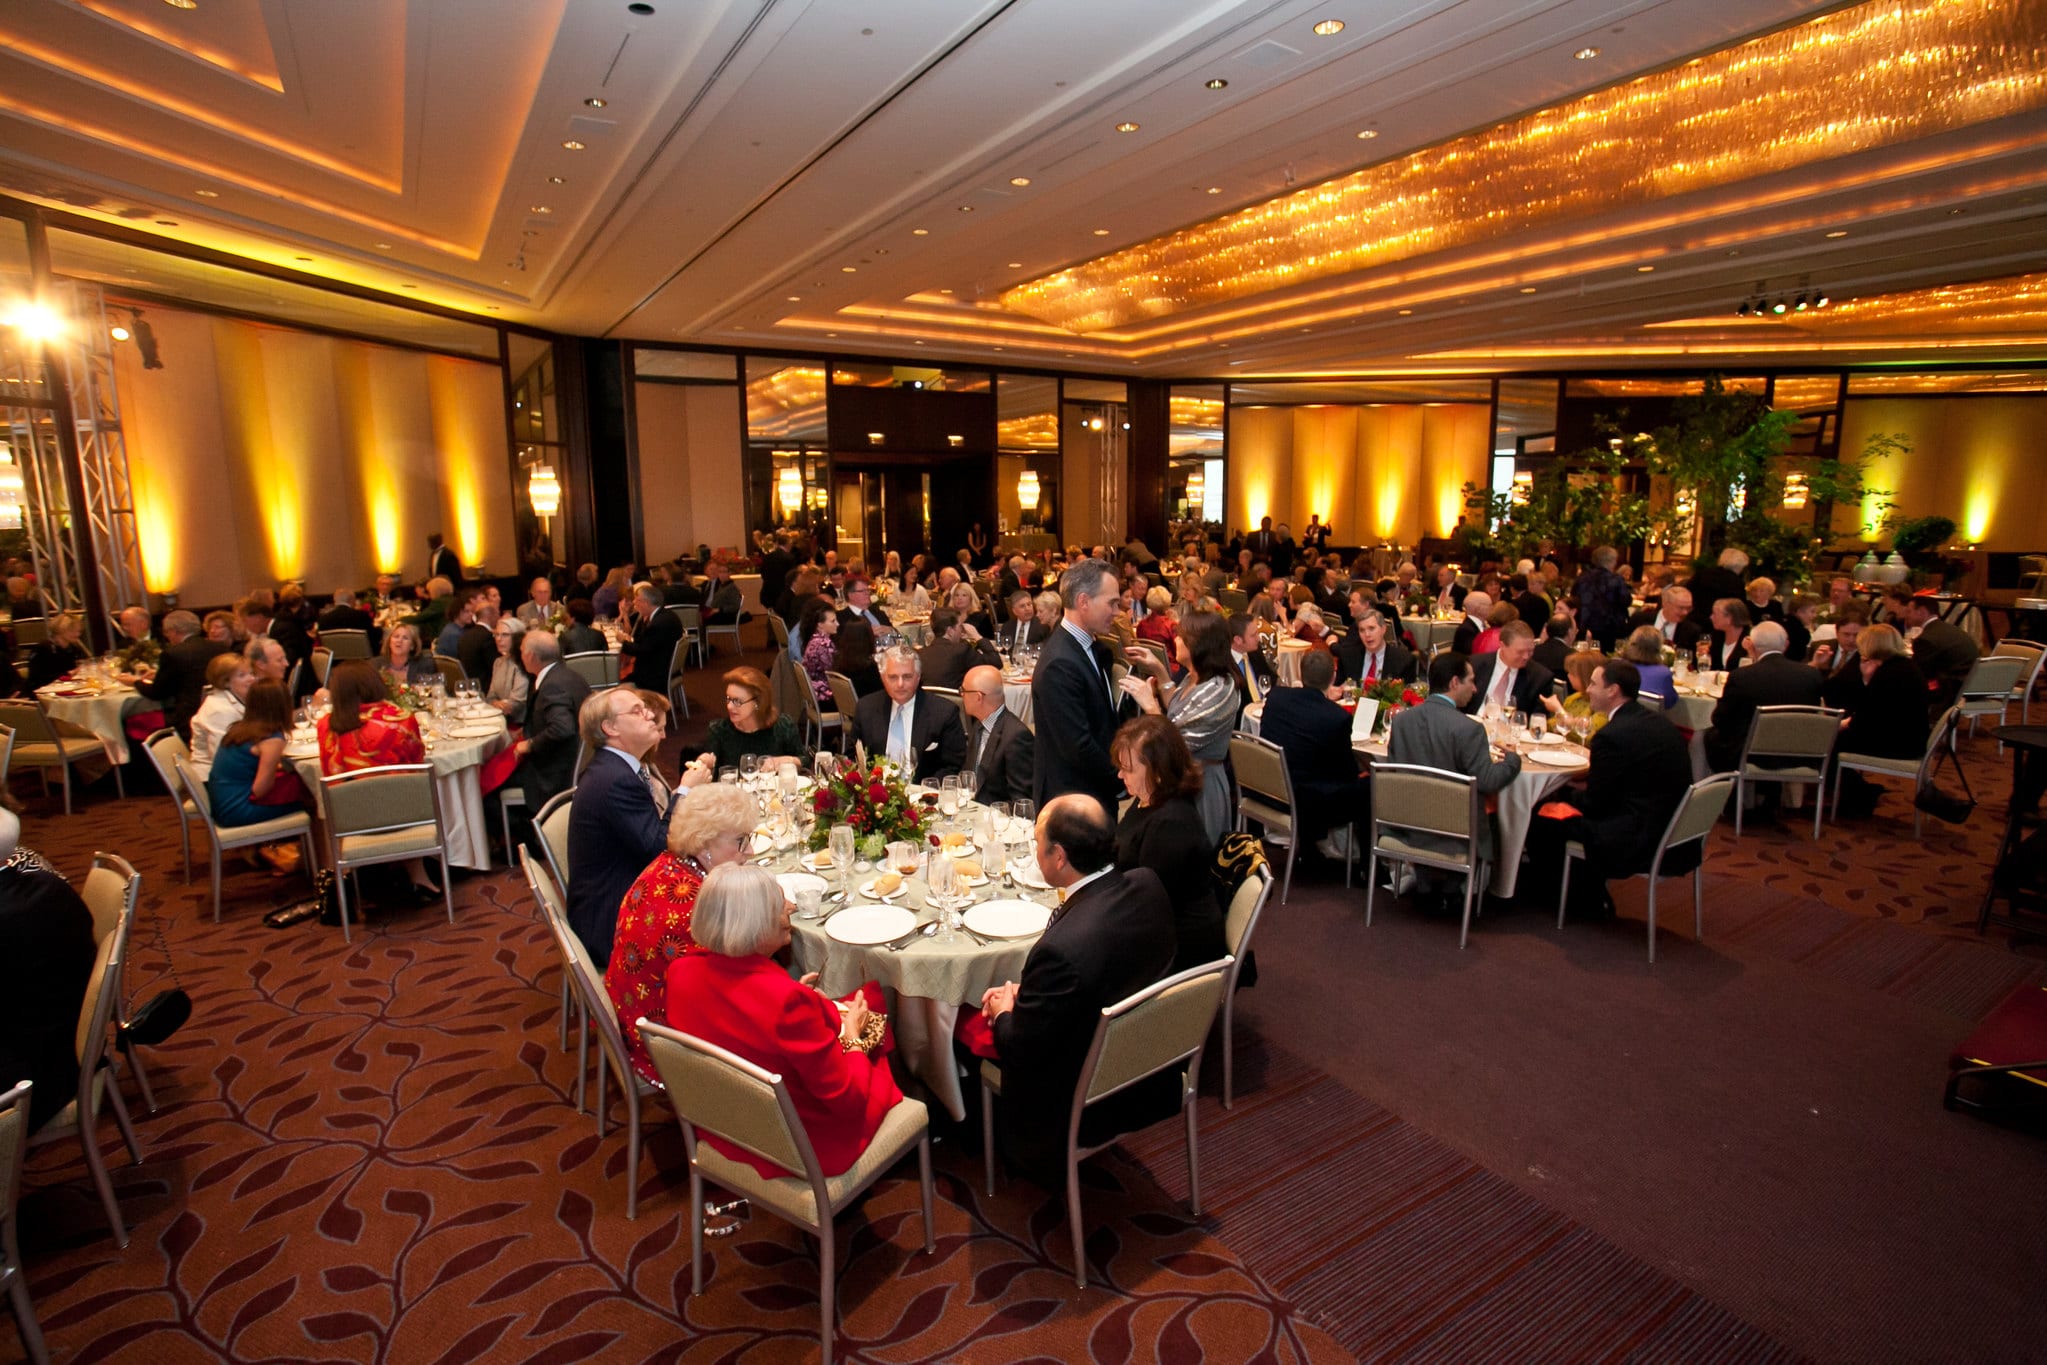 People seated at tables at a formal event